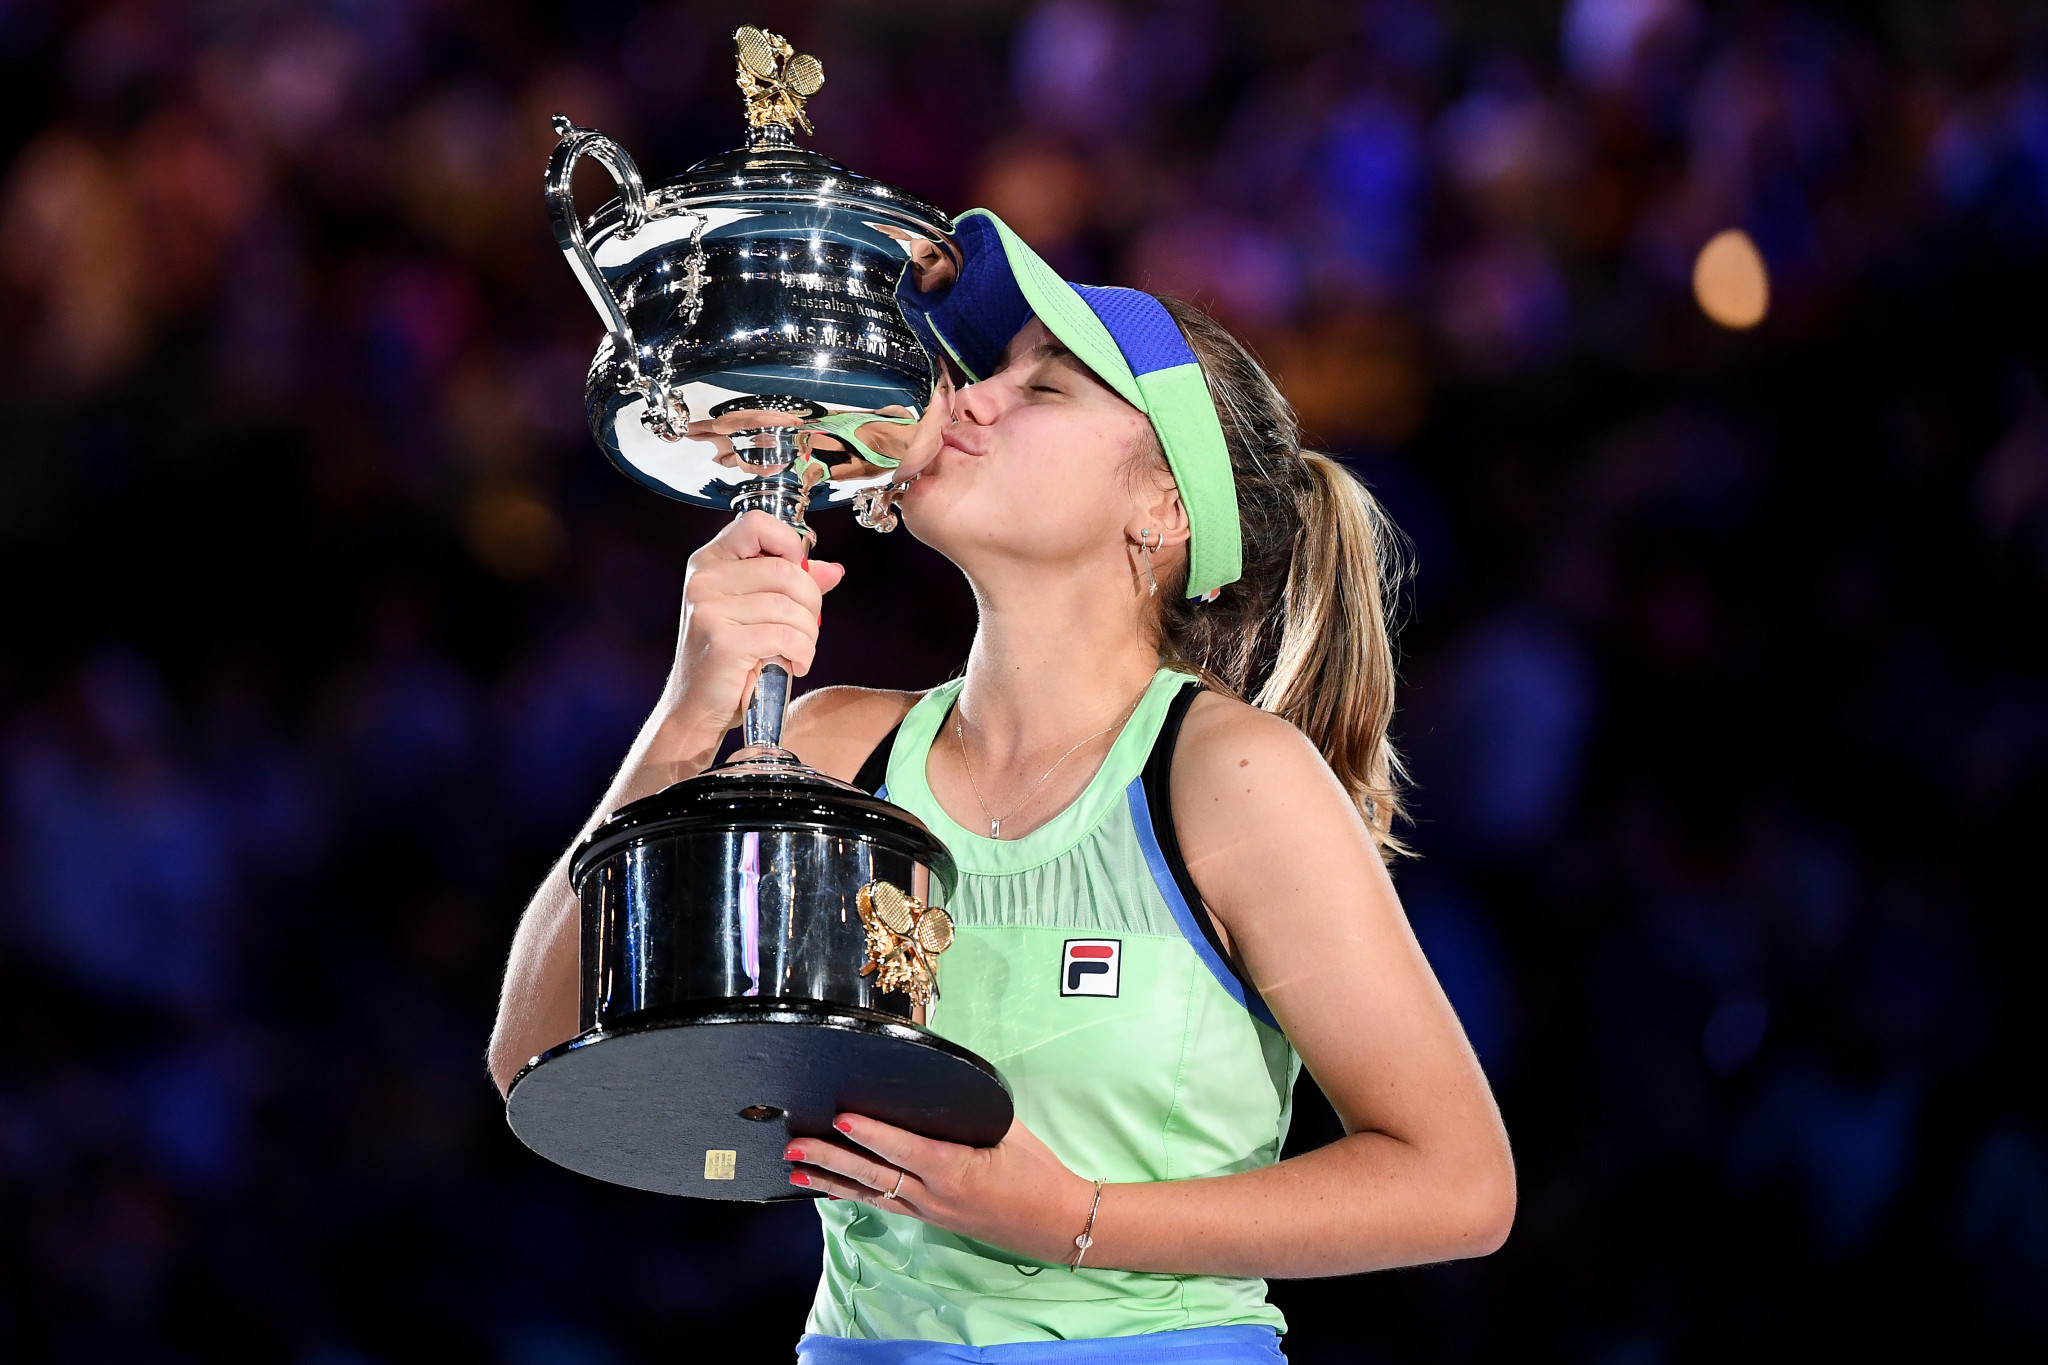 Sofia Kenin won the Australian Open this year and finished runner-up in the French Open ©Getty Images